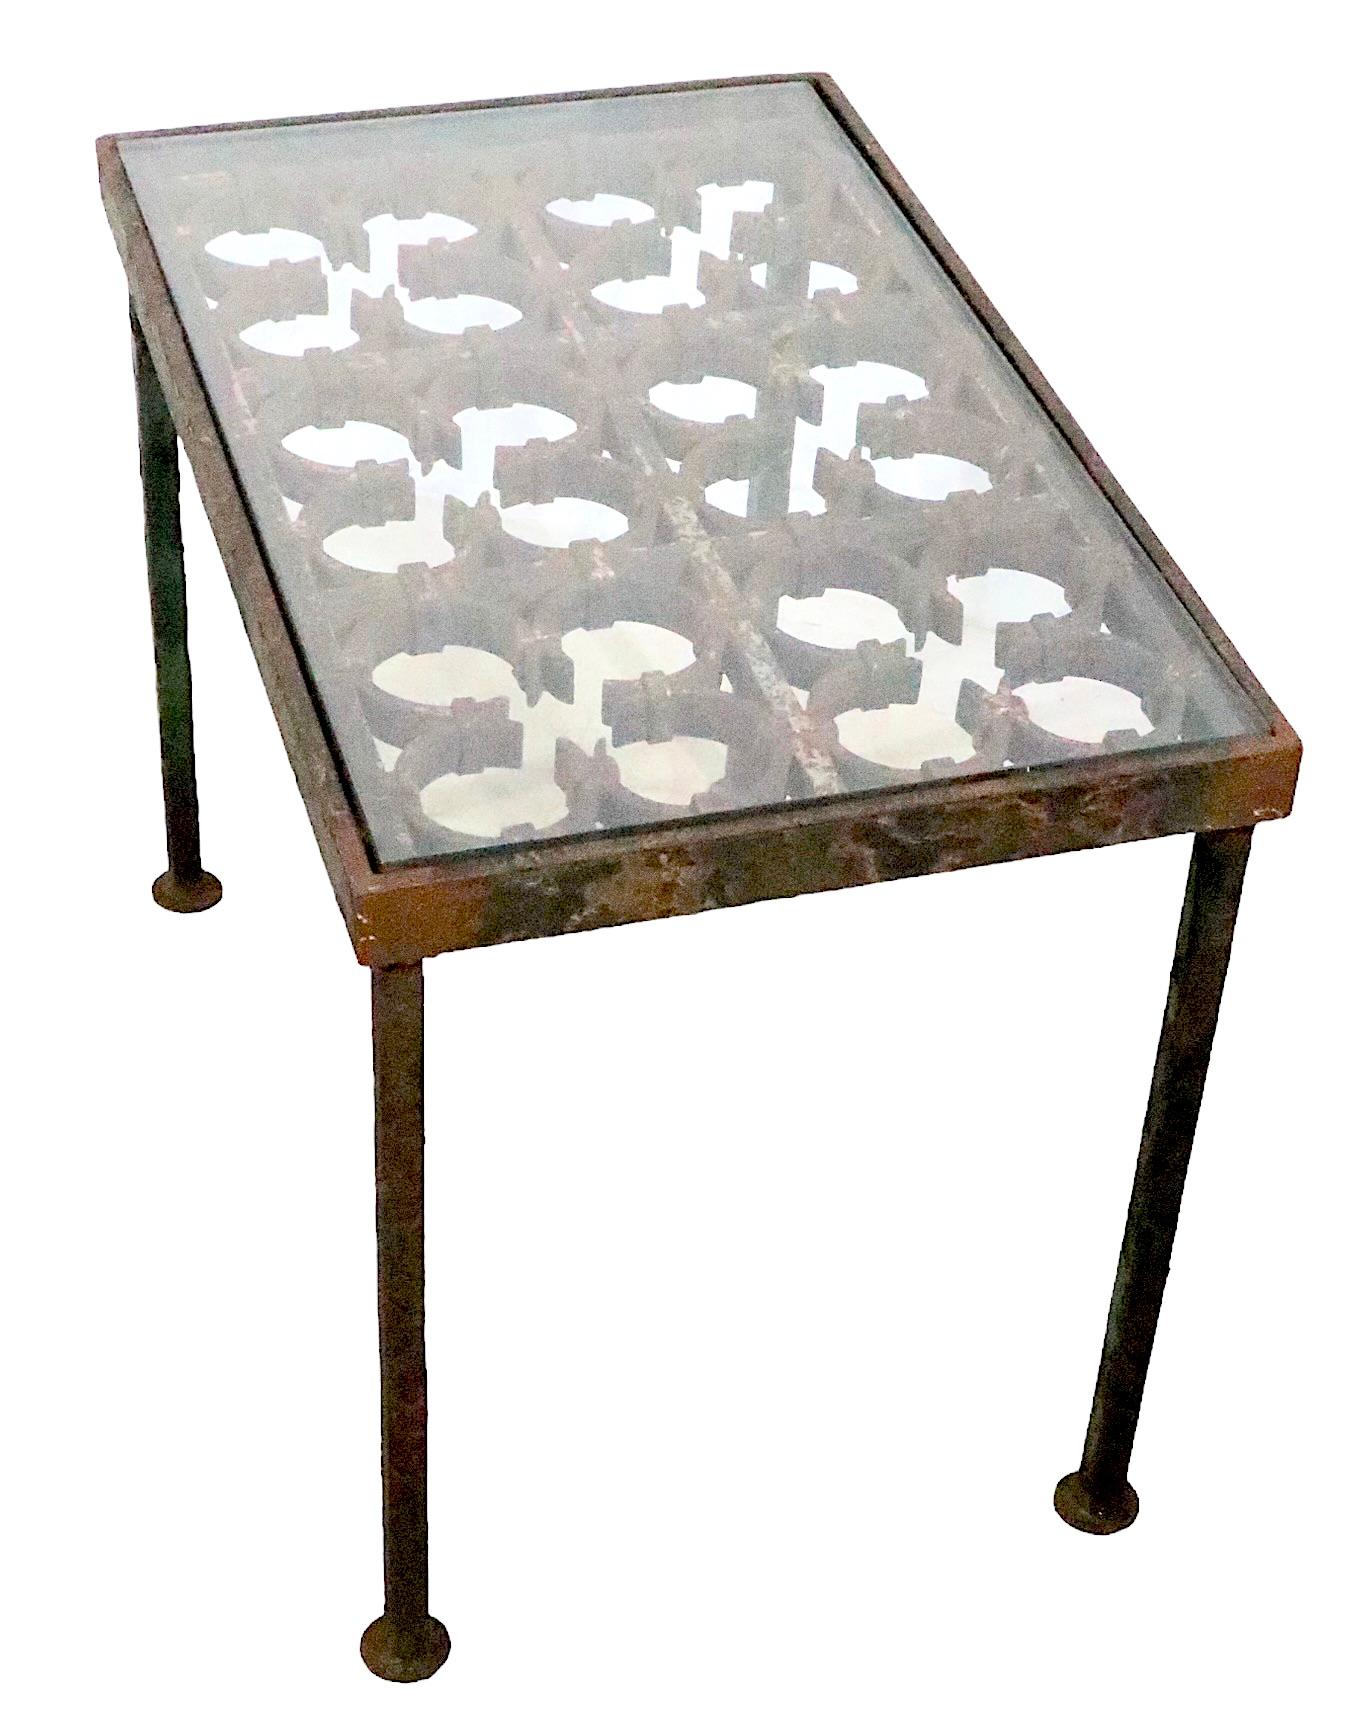 20th Century Architectural Garden Patio Side Table constructed of a cast iron panel  For Sale